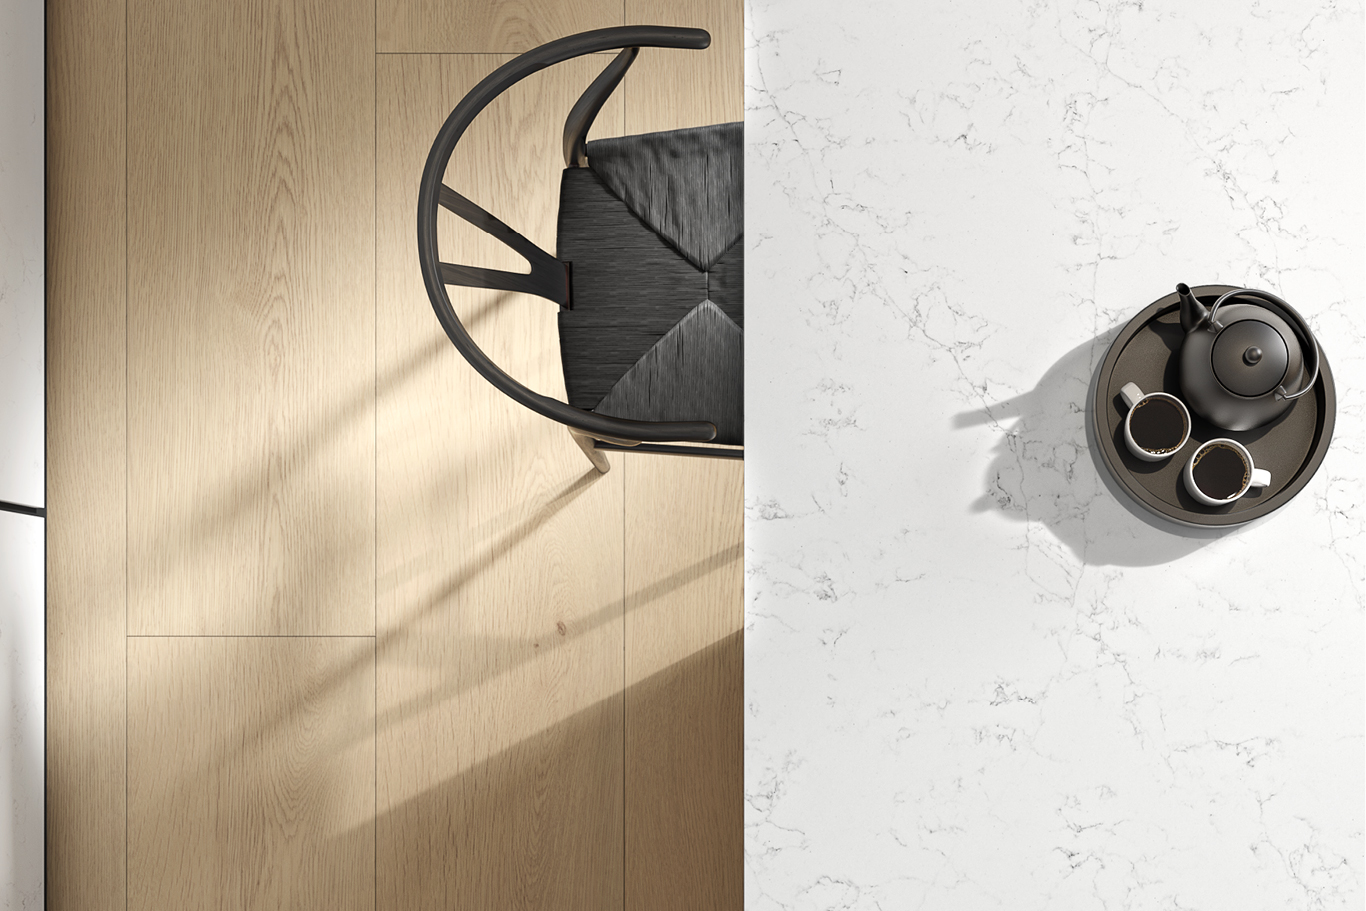 Technological quartz as an alternative to veined marble for interior design